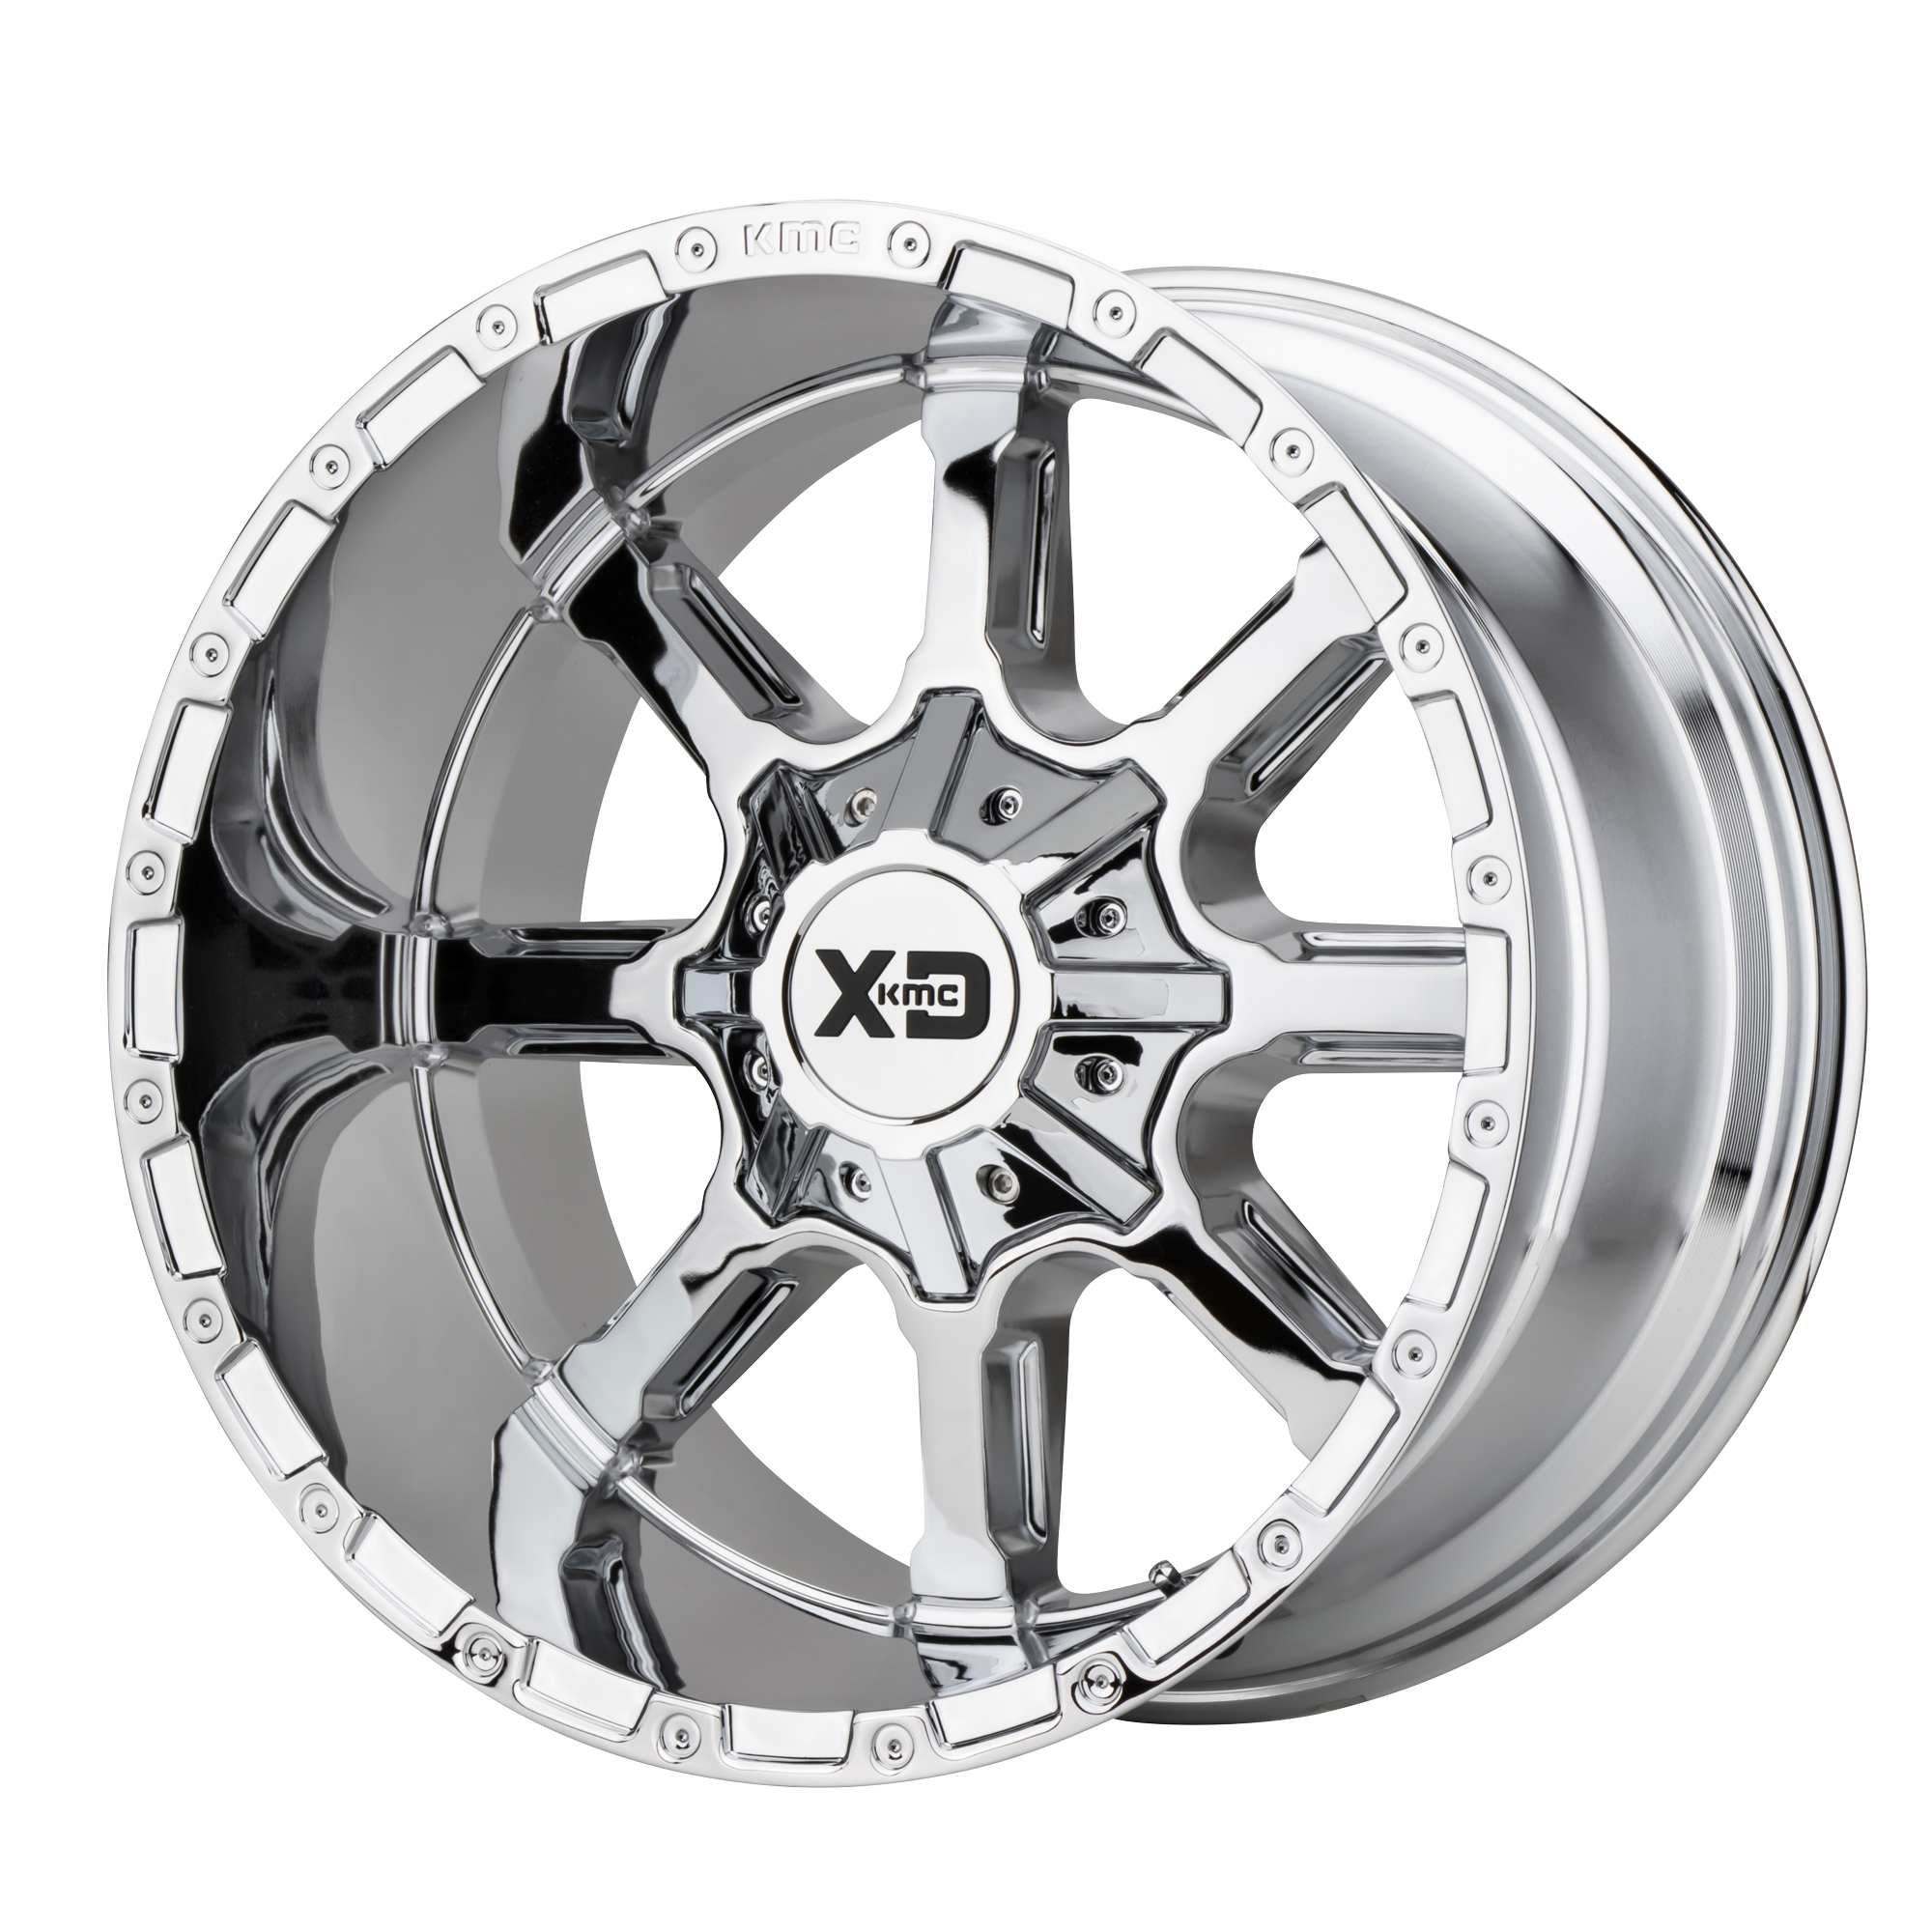 MAMMOTH 22x10 8x170.00 CHROME (12 mm) - Tires and Engine Performance